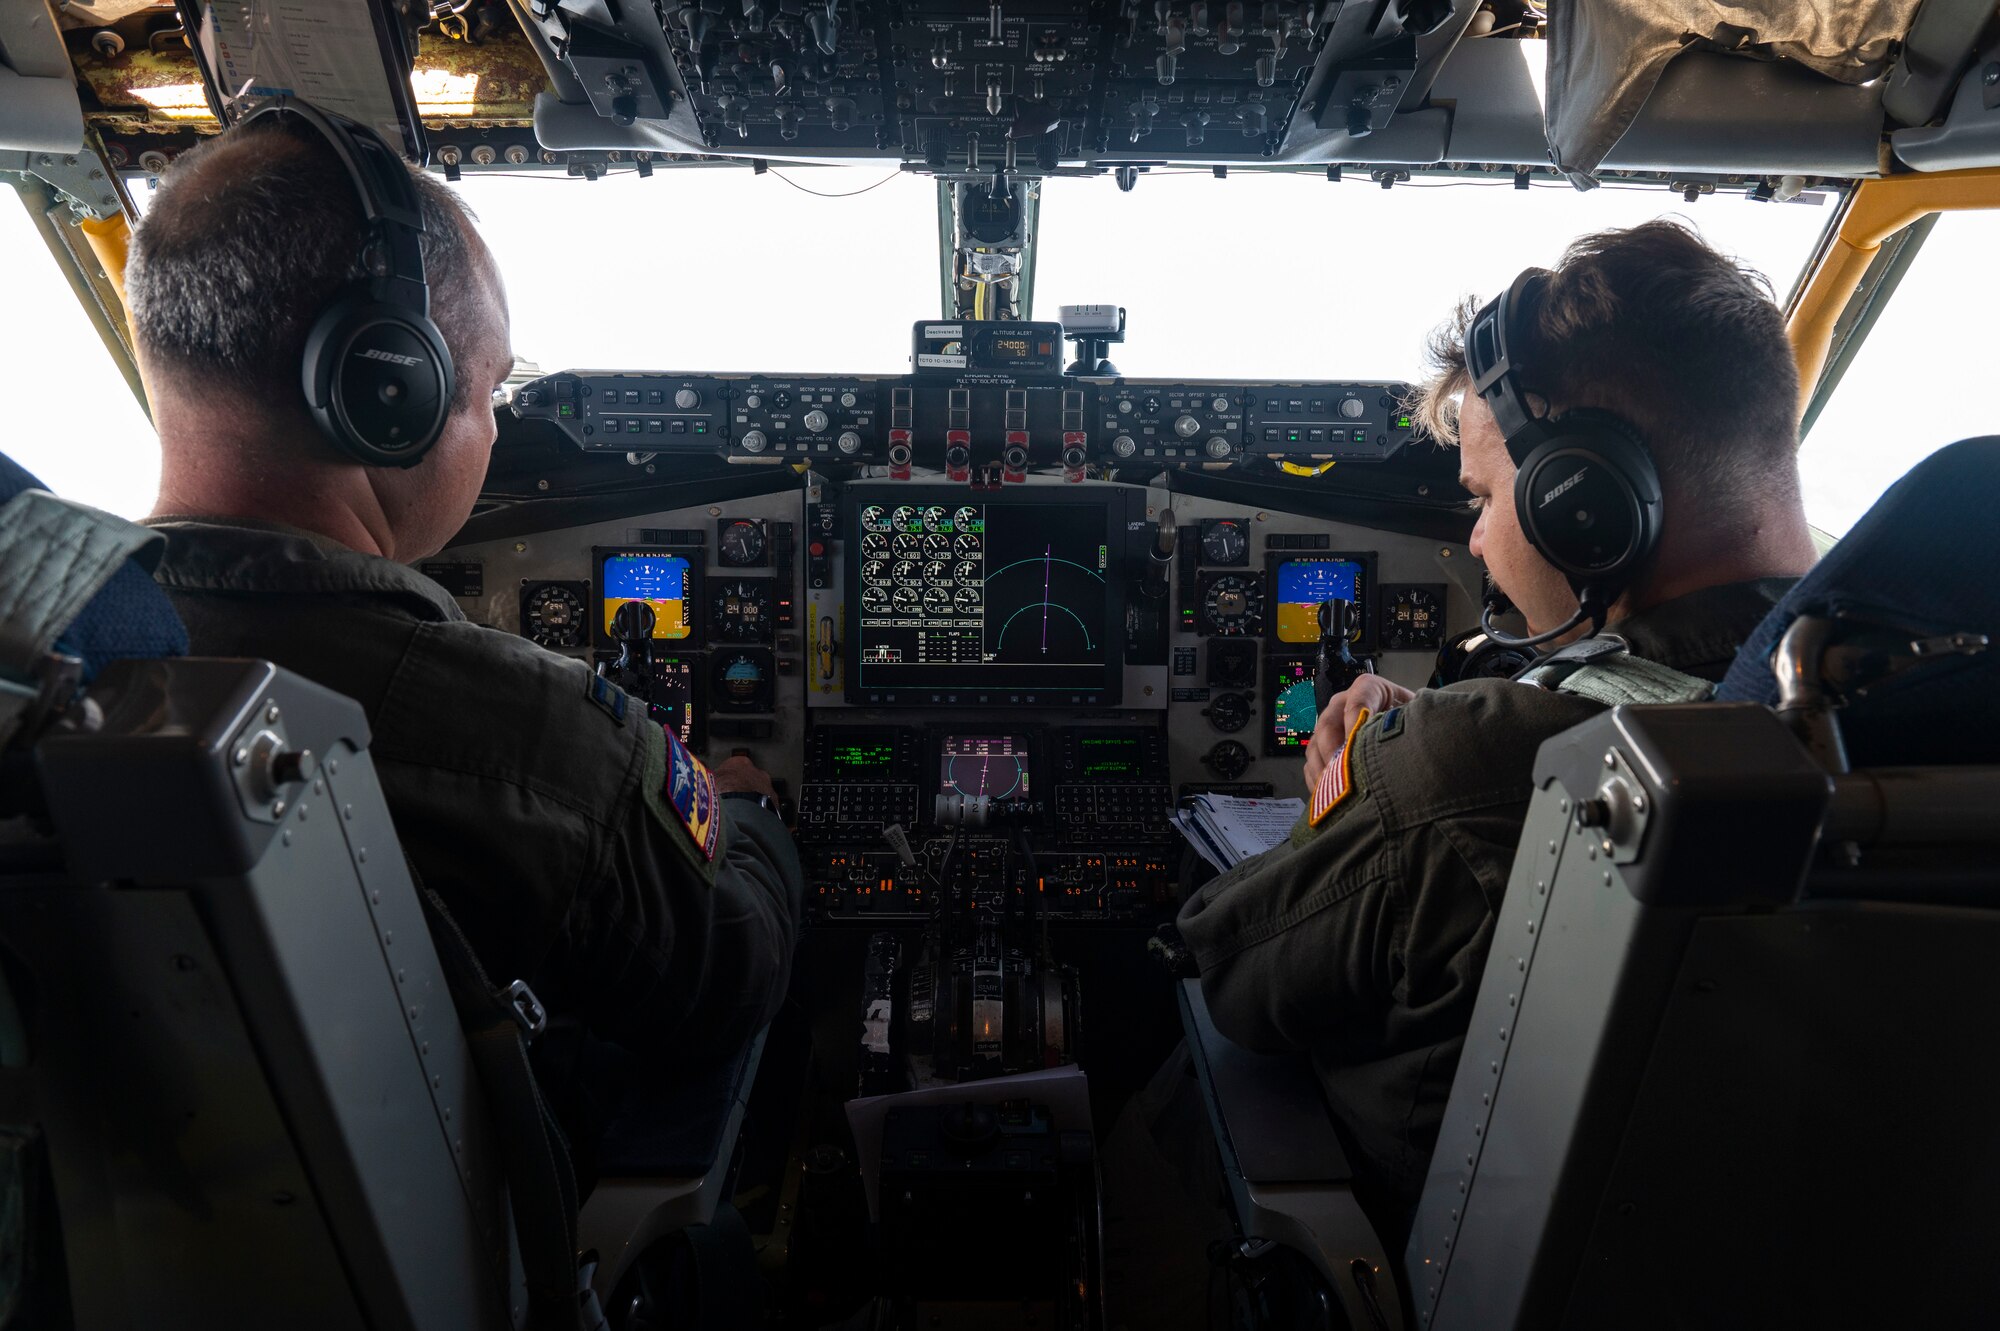 U.S. Air Force Capt. Philip Campbell (Left) and 1st Lt. Forest Staggs (Right), 384th Aerial Refueling Squadron KC-135 Stratotanker pilots, operate a KC-135, assigned to the 92nd Aerial Refueling Wing, during Mobility Guardian 23 over the Indo-Pacific region, July 14, 2023. 3,000 personnel directly supported the large-scale mobility exercise, which provided the maneuver of more than 15,000 U.S. and international forces associated with other exercises across the Indo-Pacific held in the same timeframe. (U.S. Air Force photo by Tech. Sgt. Heather Clements)